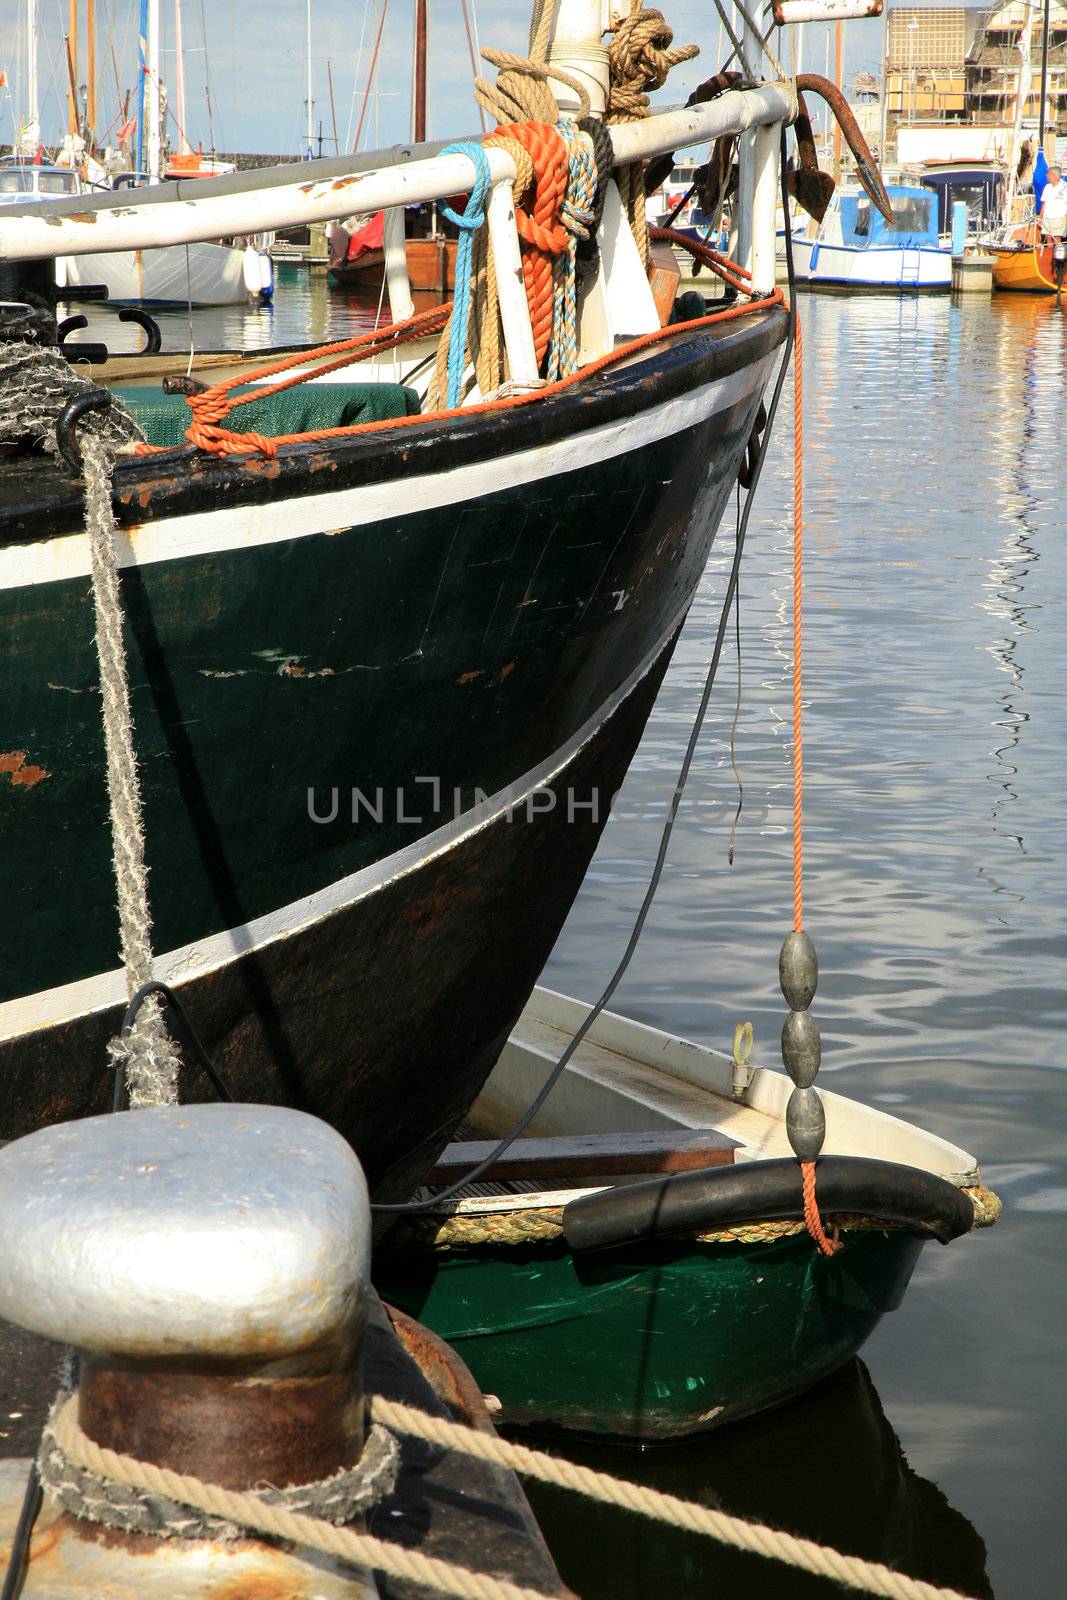 Boats in port - Urk, the Netherlands. Picturesque, small town in Flevoland.